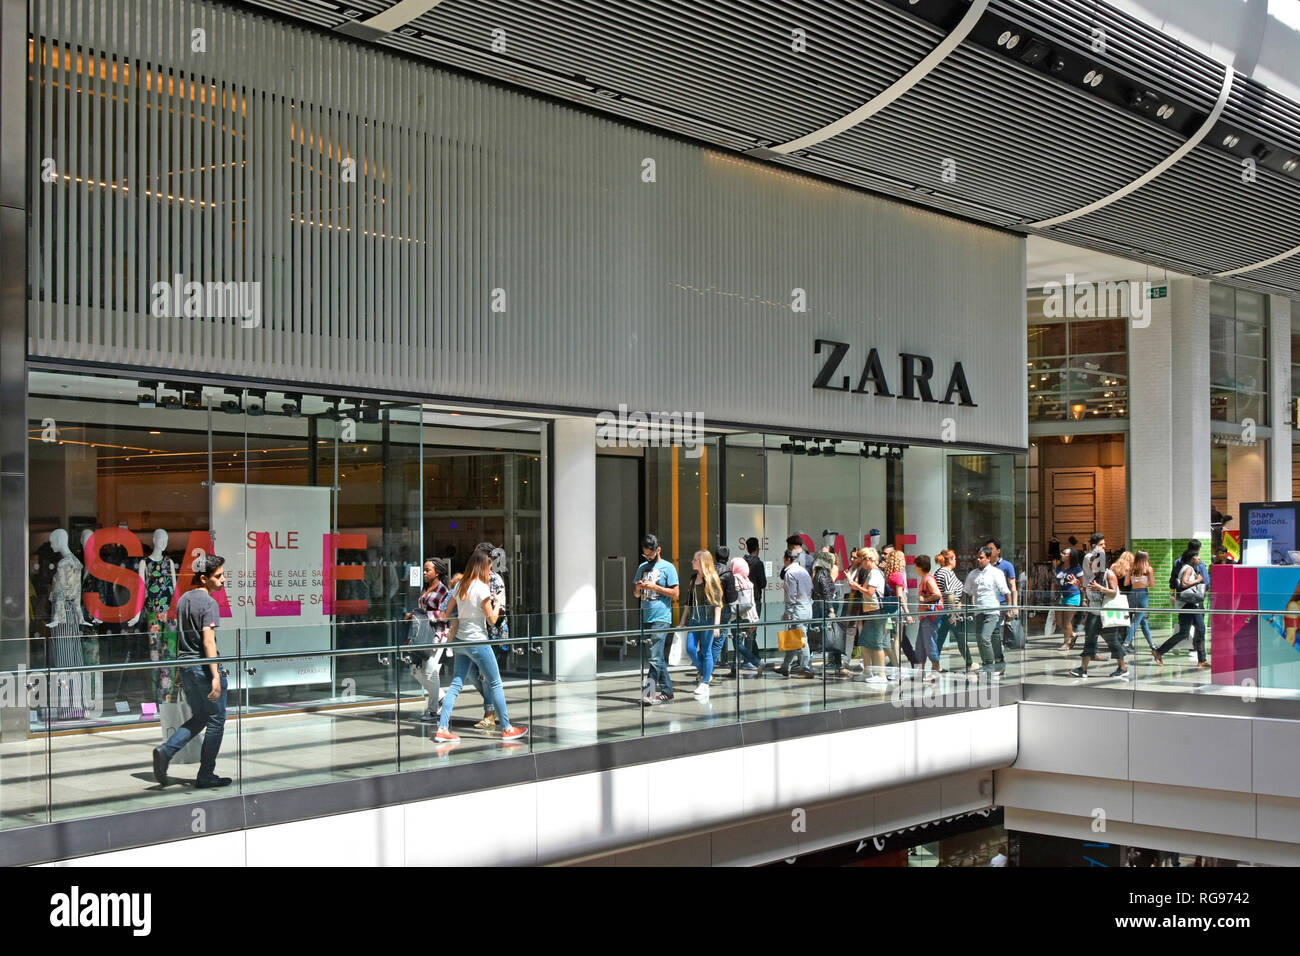 Zara fast fashion shop front window retail store clothing business sale  sign Westfield shopping centre mall Stratford Newham East London England UK  Stock Photo - Alamy